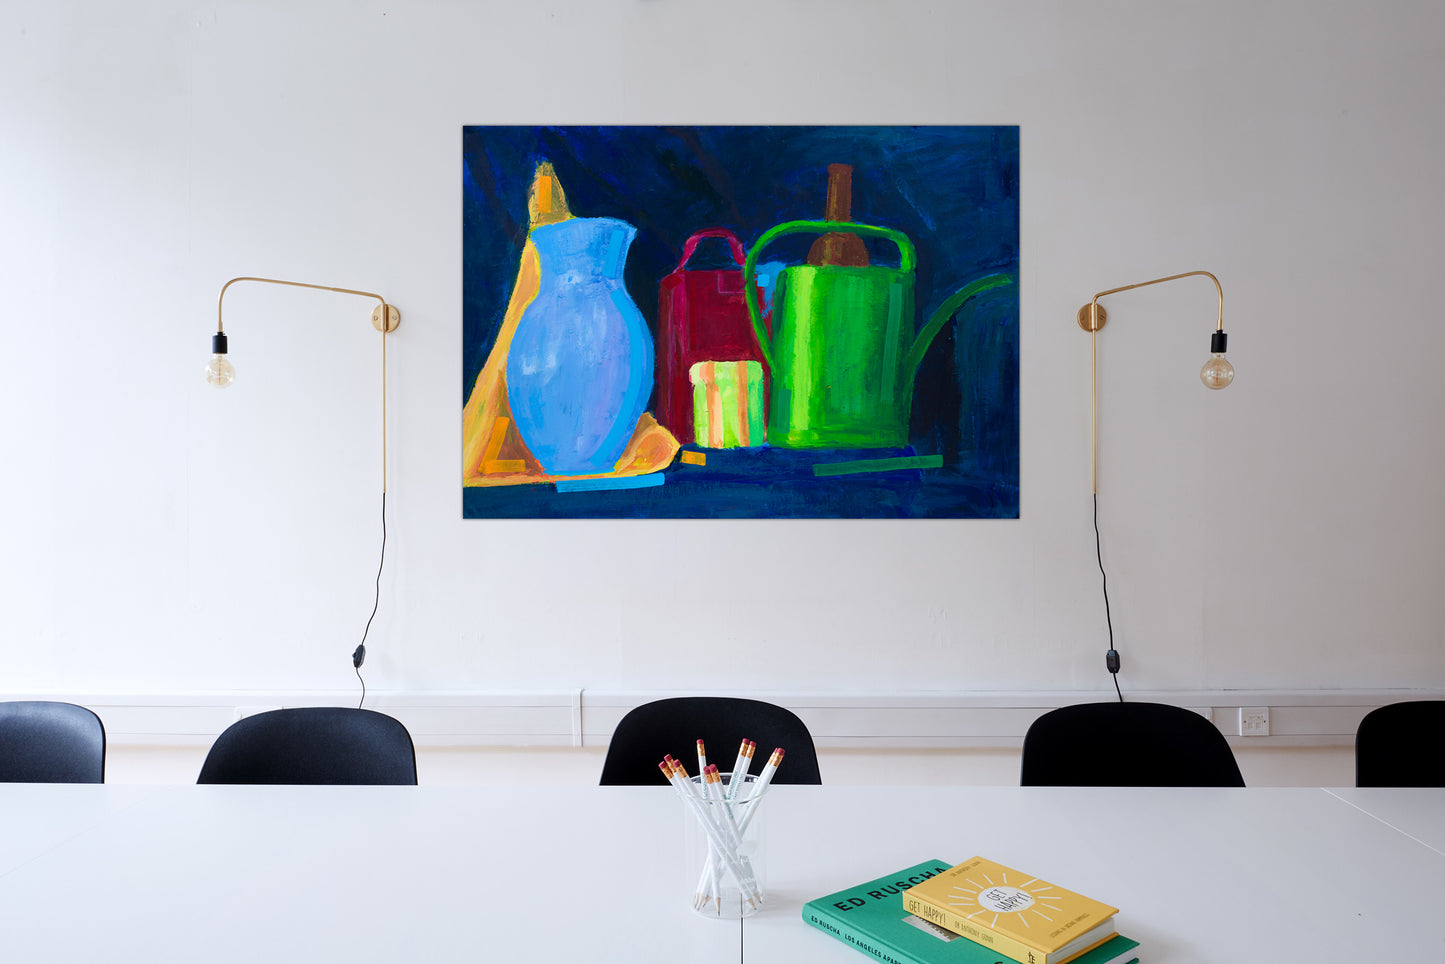 Still Life with Candle : 20" x 28" - 50 x 70 cm